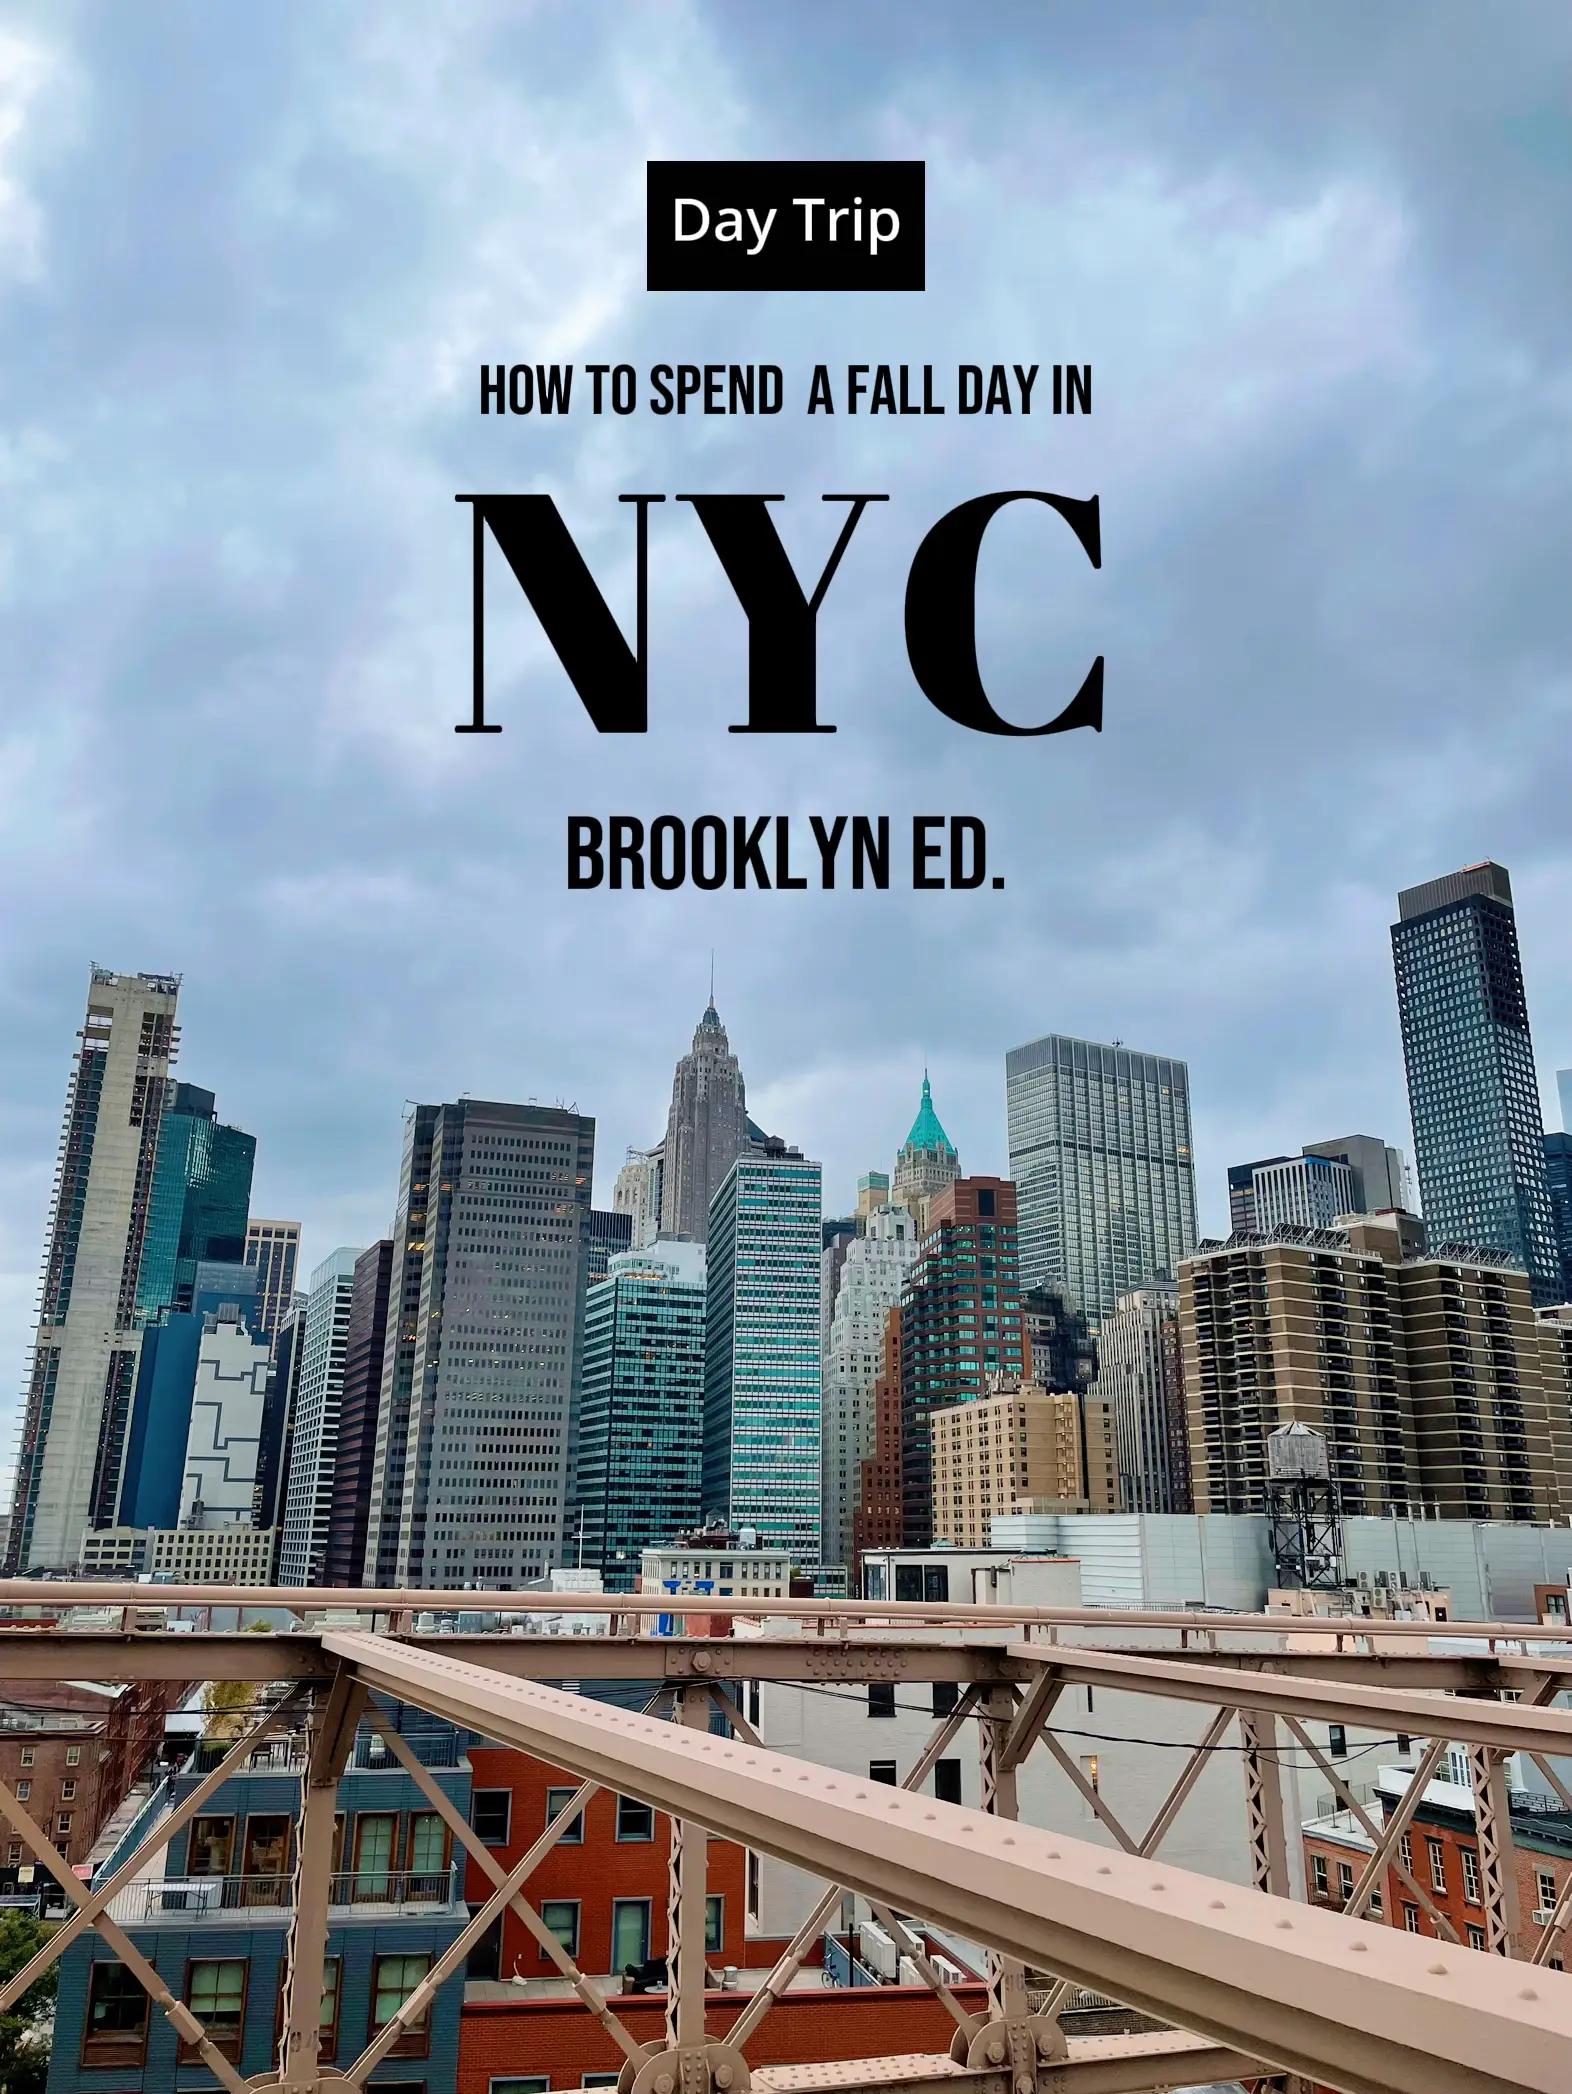 How to Spend A Day in NYC (Brooklyn Ed.)🏙️'s images